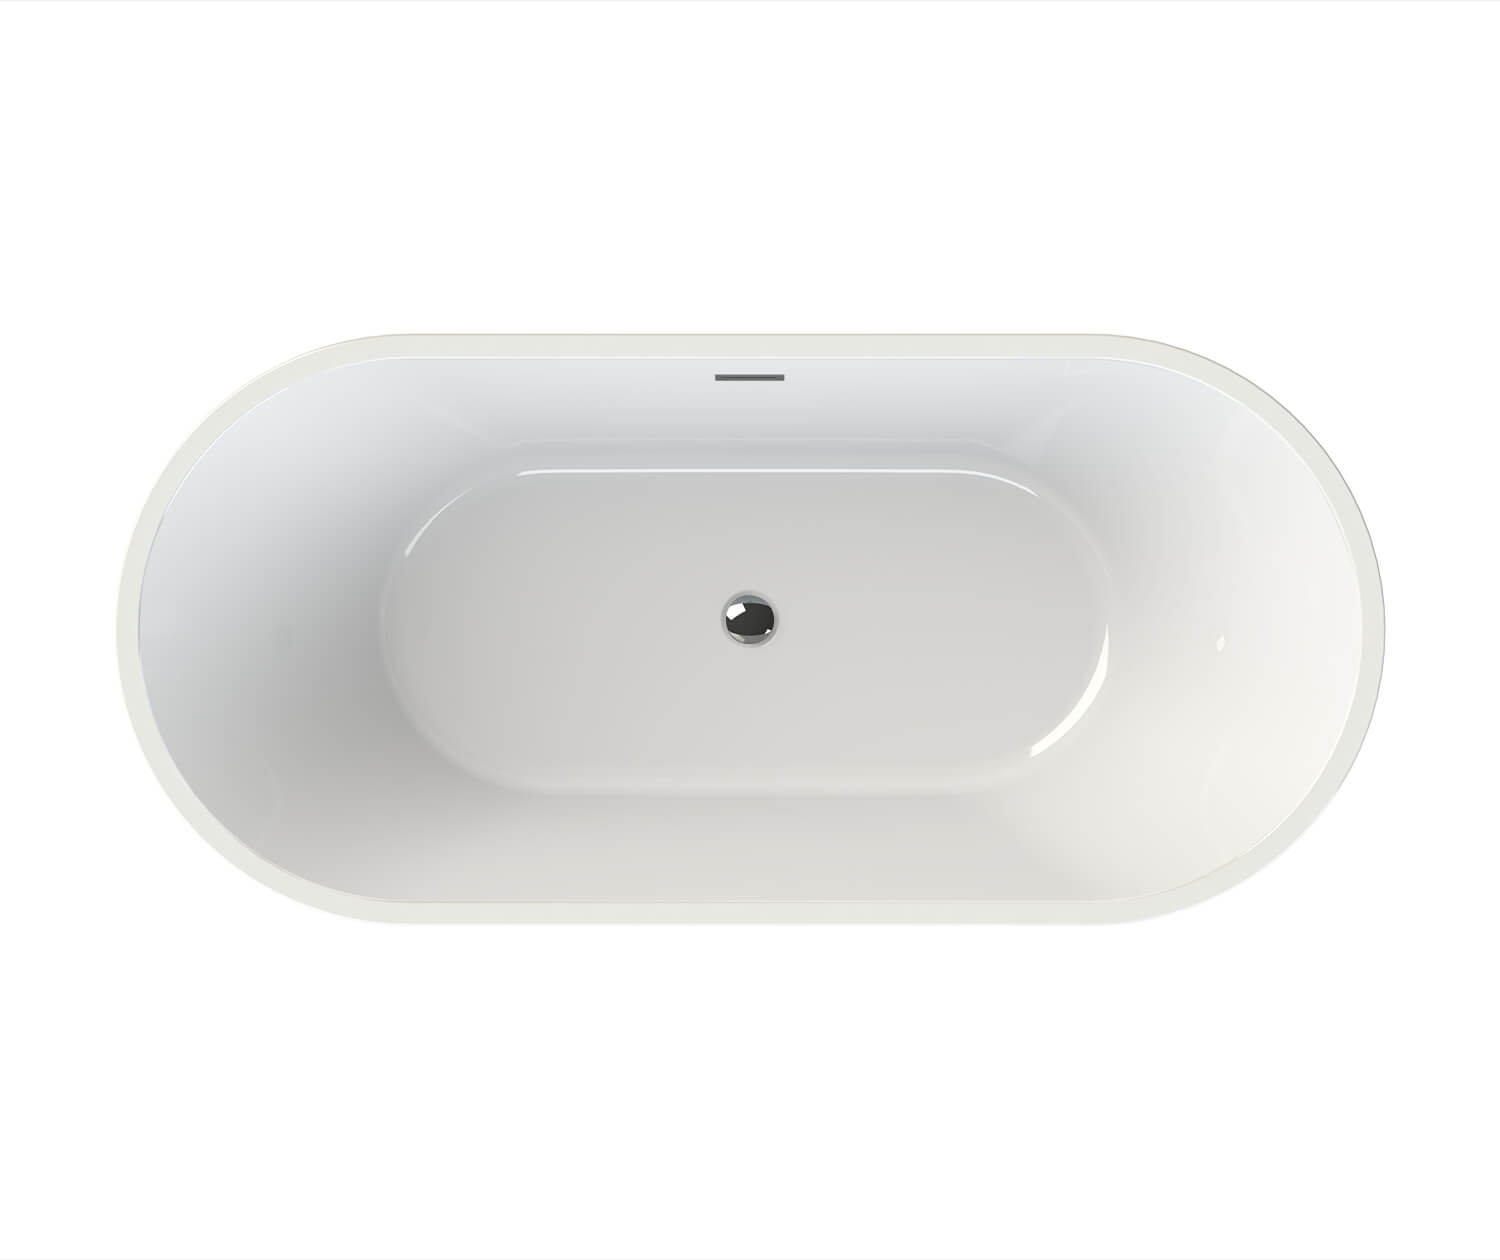 Louie 6731 Acrylic Freestanding Center Drain Bathtub in White with 